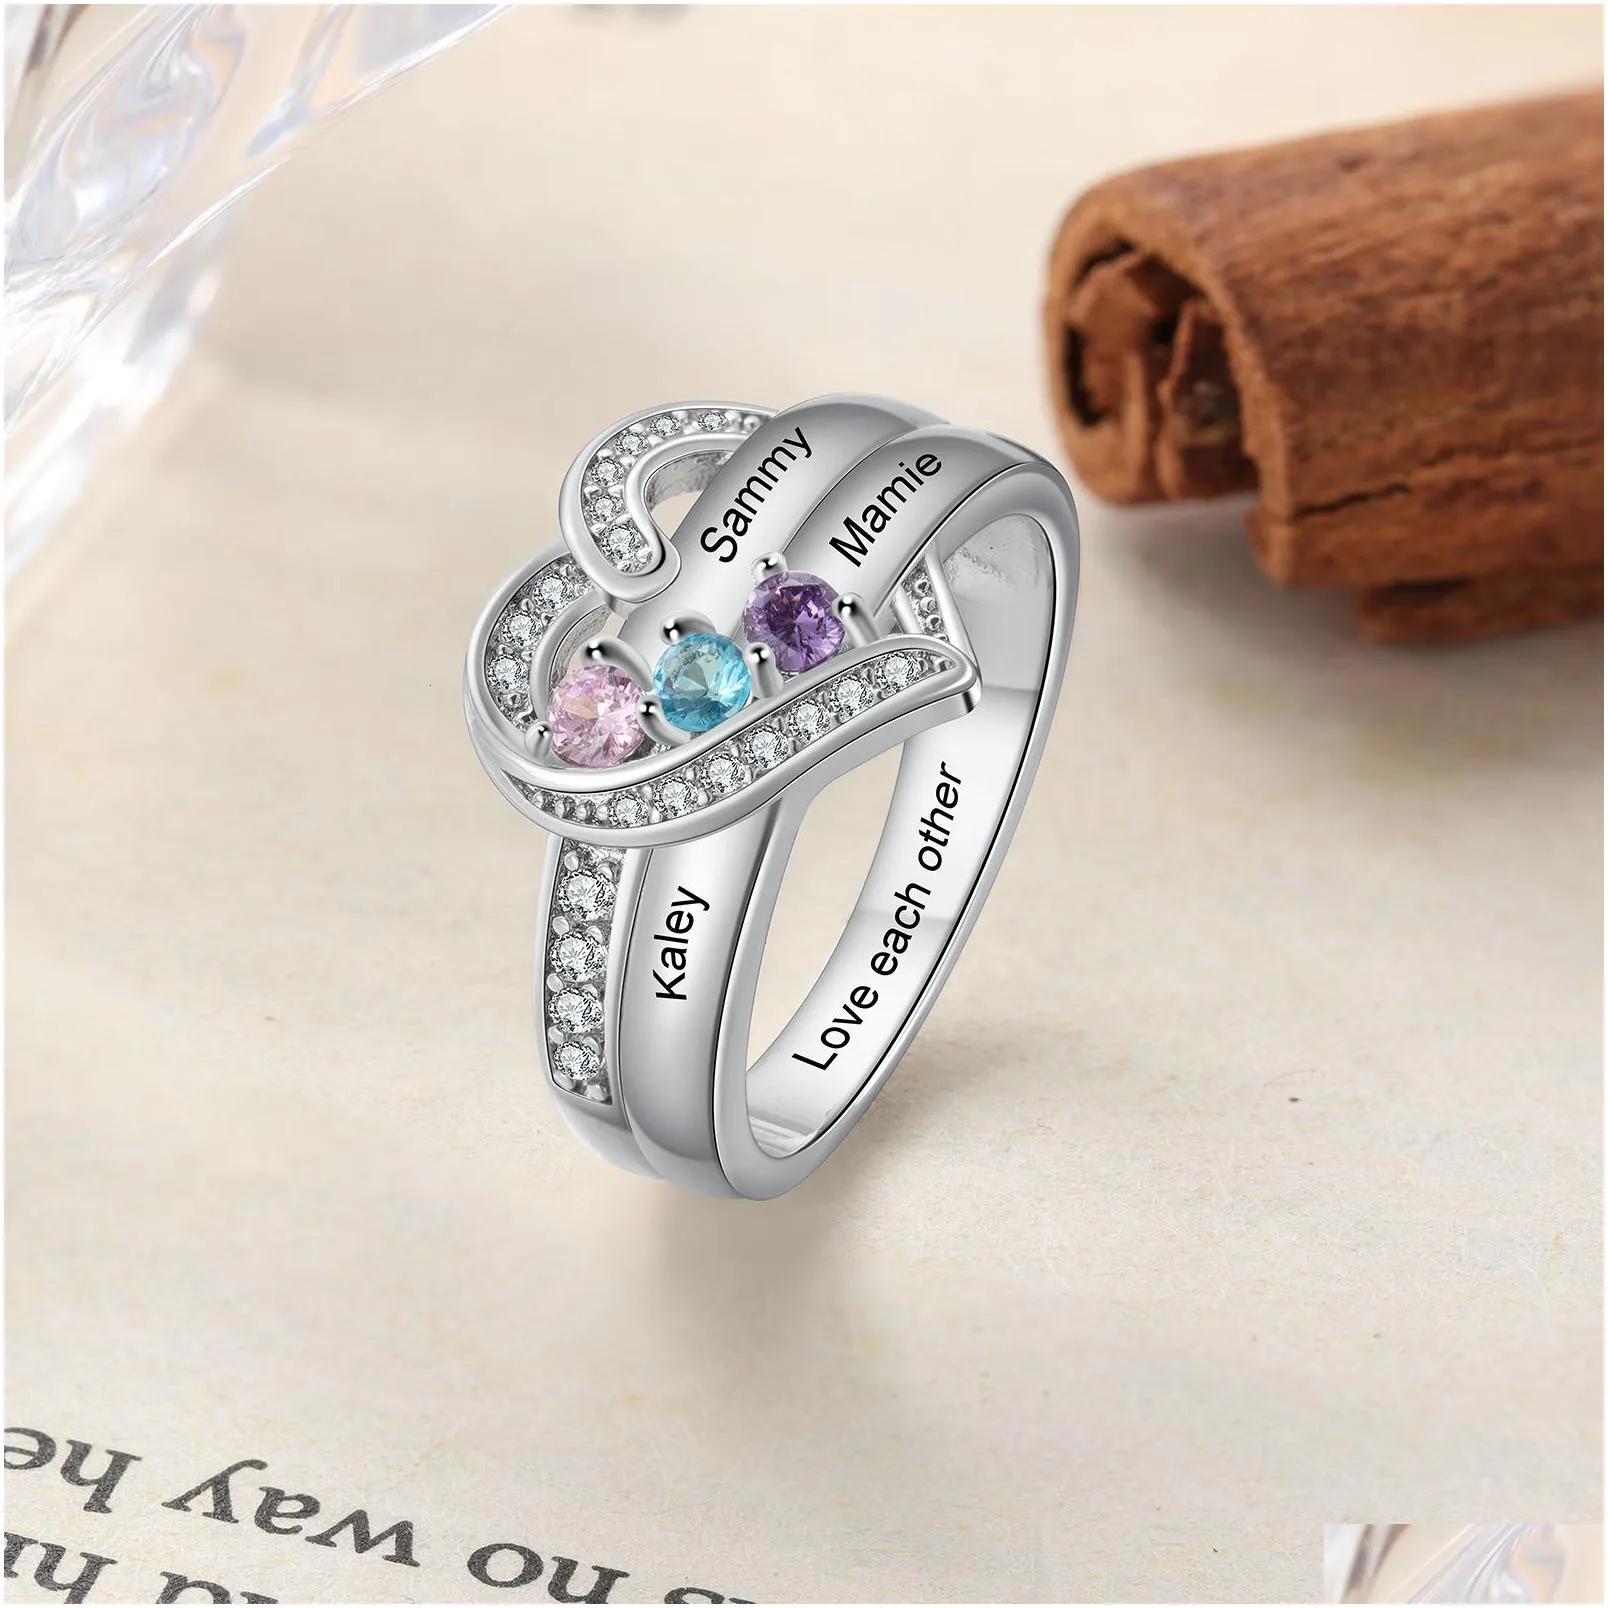 Wedding Rings 925 Sterling Sier Personalized 1-8 Name Carved Ring With Birthday Stone Set Heart Suitable For Womens Mothers Day Gift Dhfrt